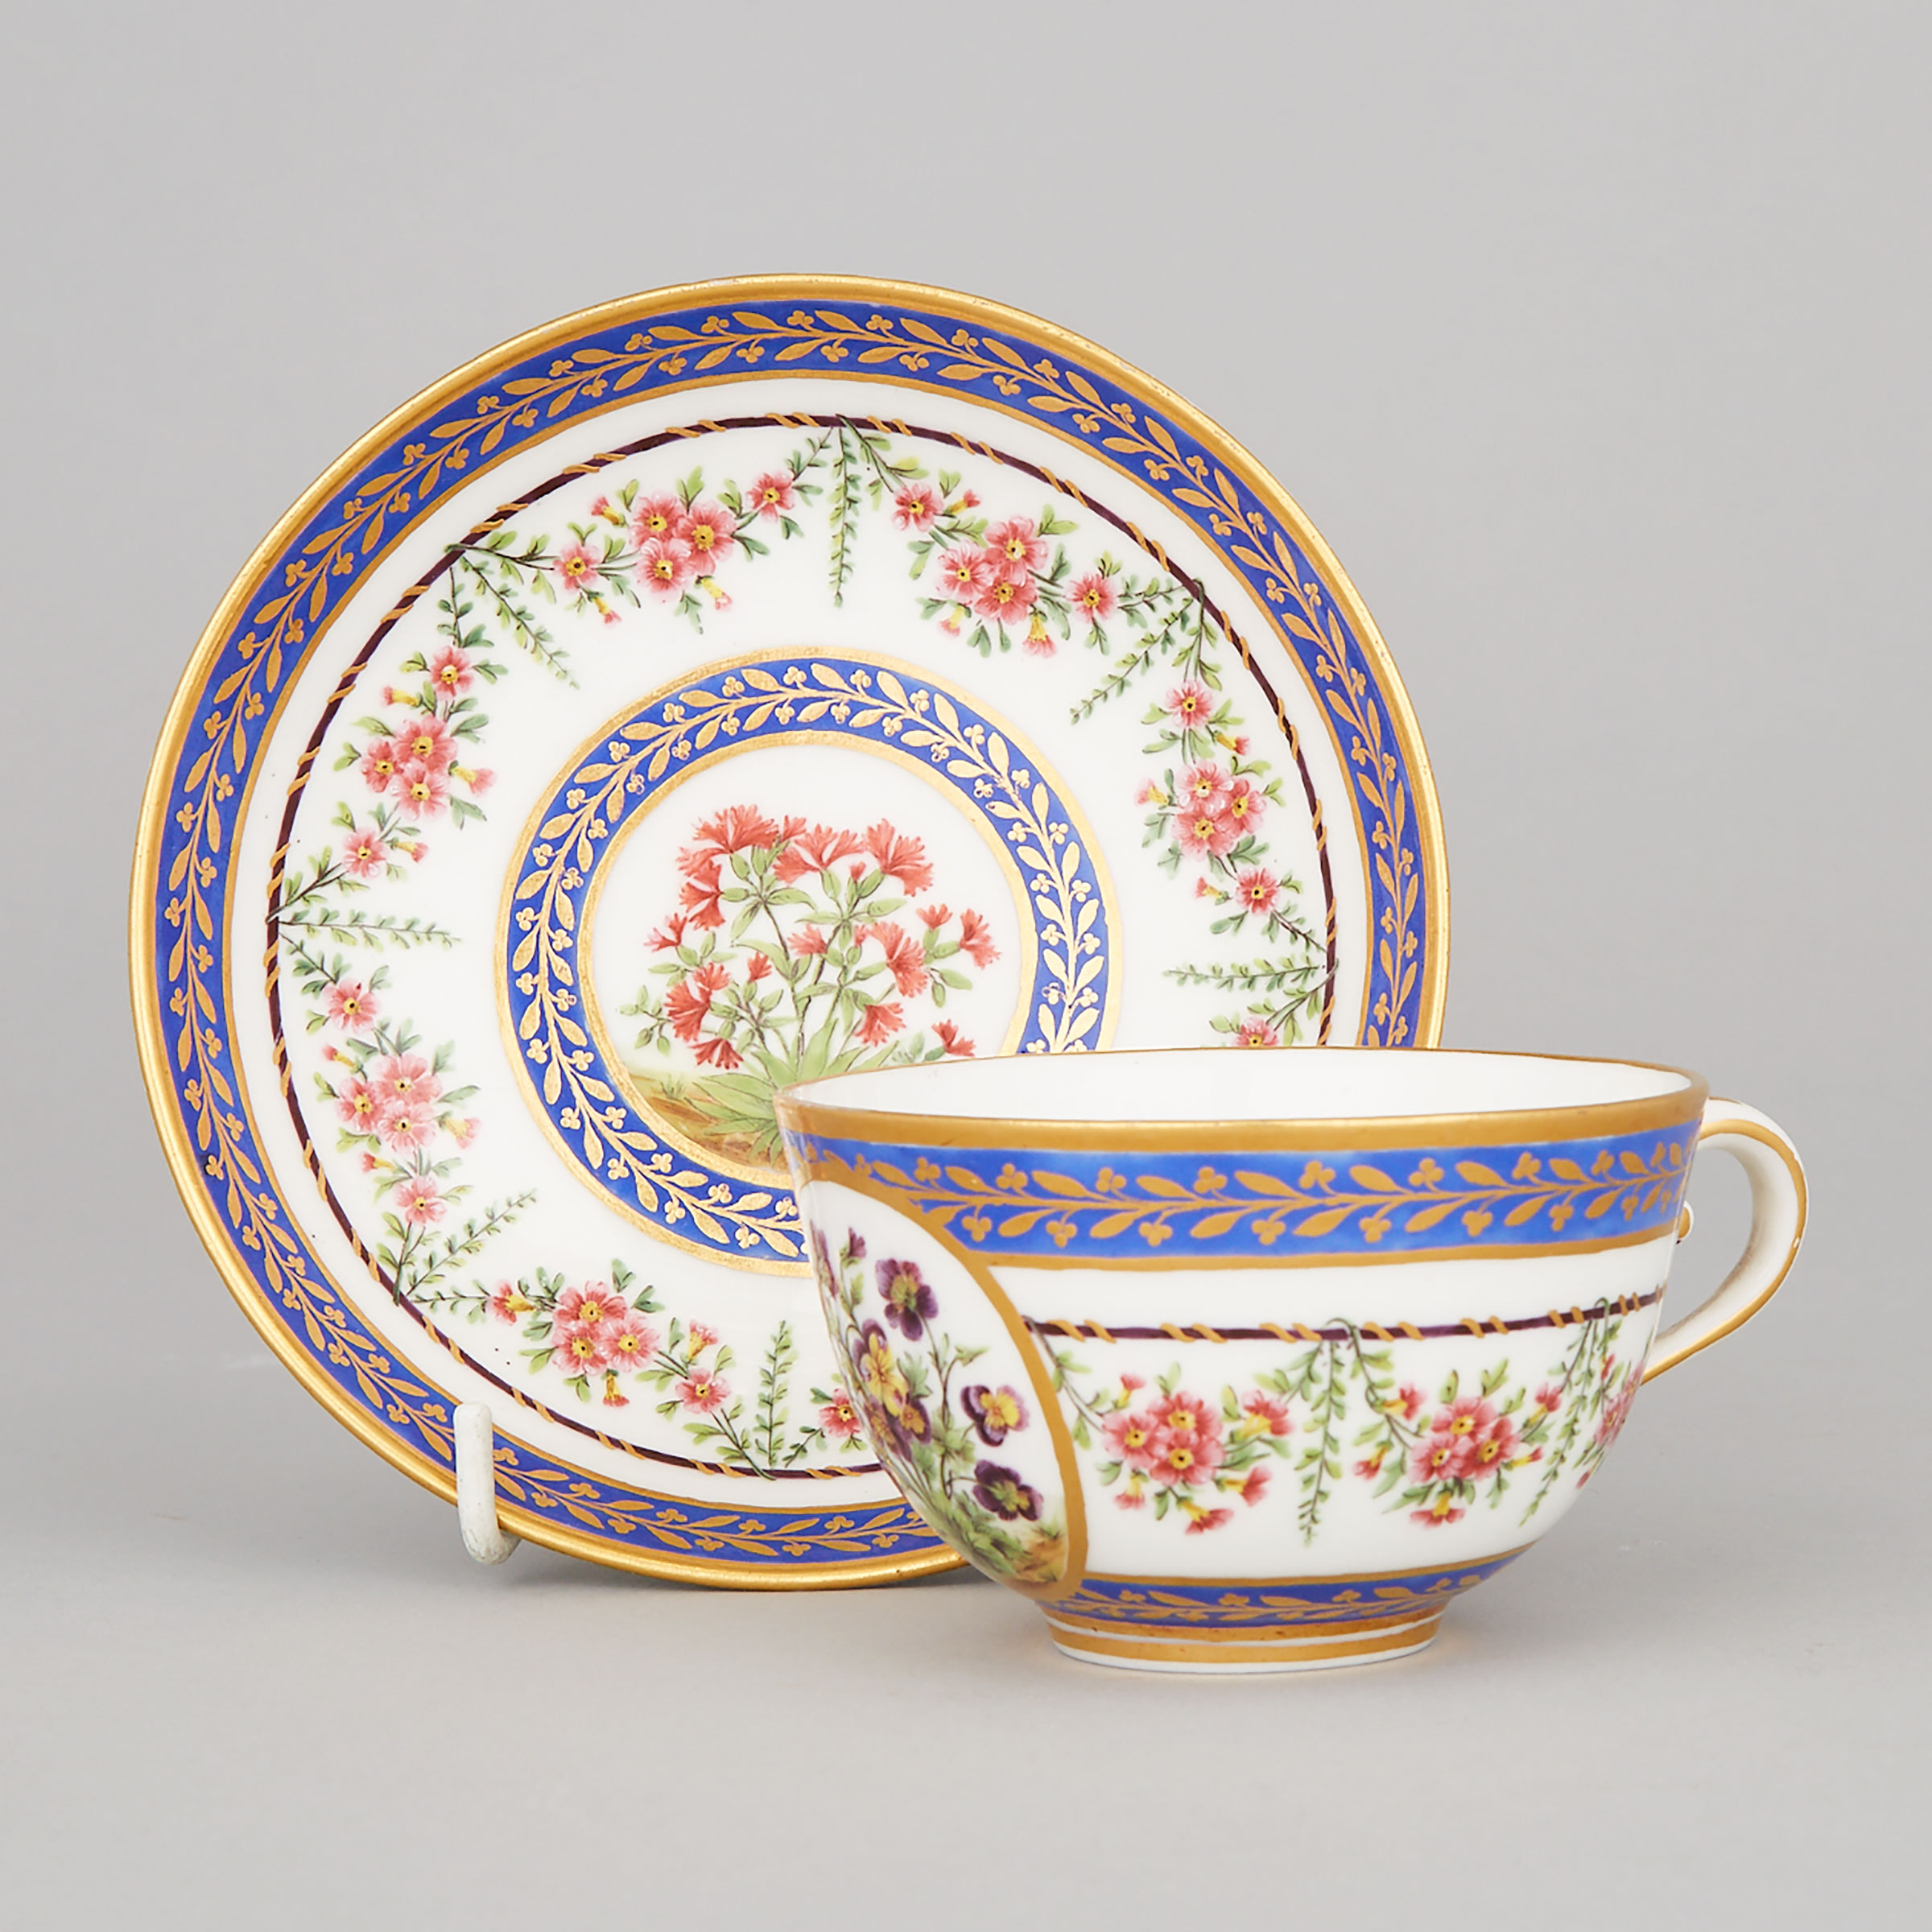 Sèvres Floral and Gilt Decorated Cup and Saucer, c.1791